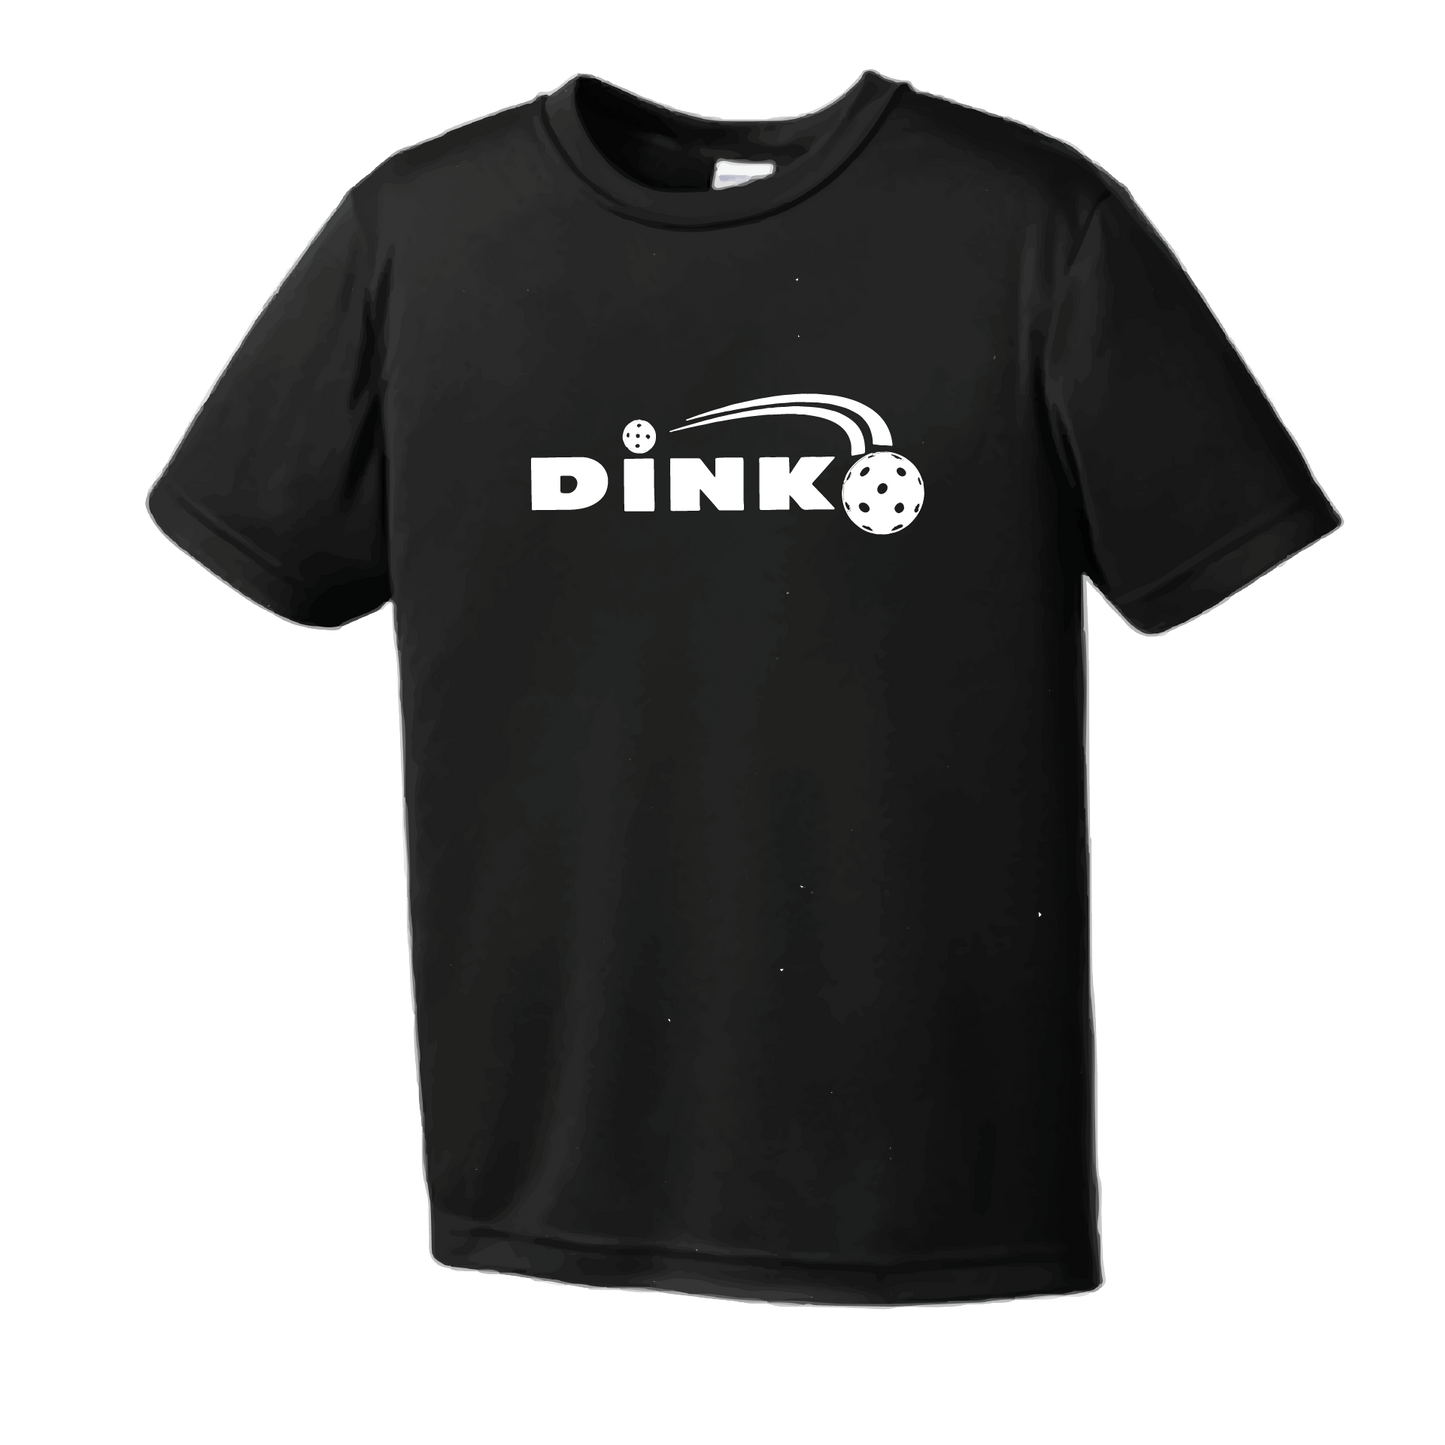 Pickeball Design: Dink  Men's Style: Short-Sleeve (SS)  Shirts are lightweight, roomy and highly breathable. These moisture-wicking shirts are designed for athletic performance. They feature PosiCharge technology to lock in color and prevent logos from fading. Removable tag and set-in sleeves for comfort.